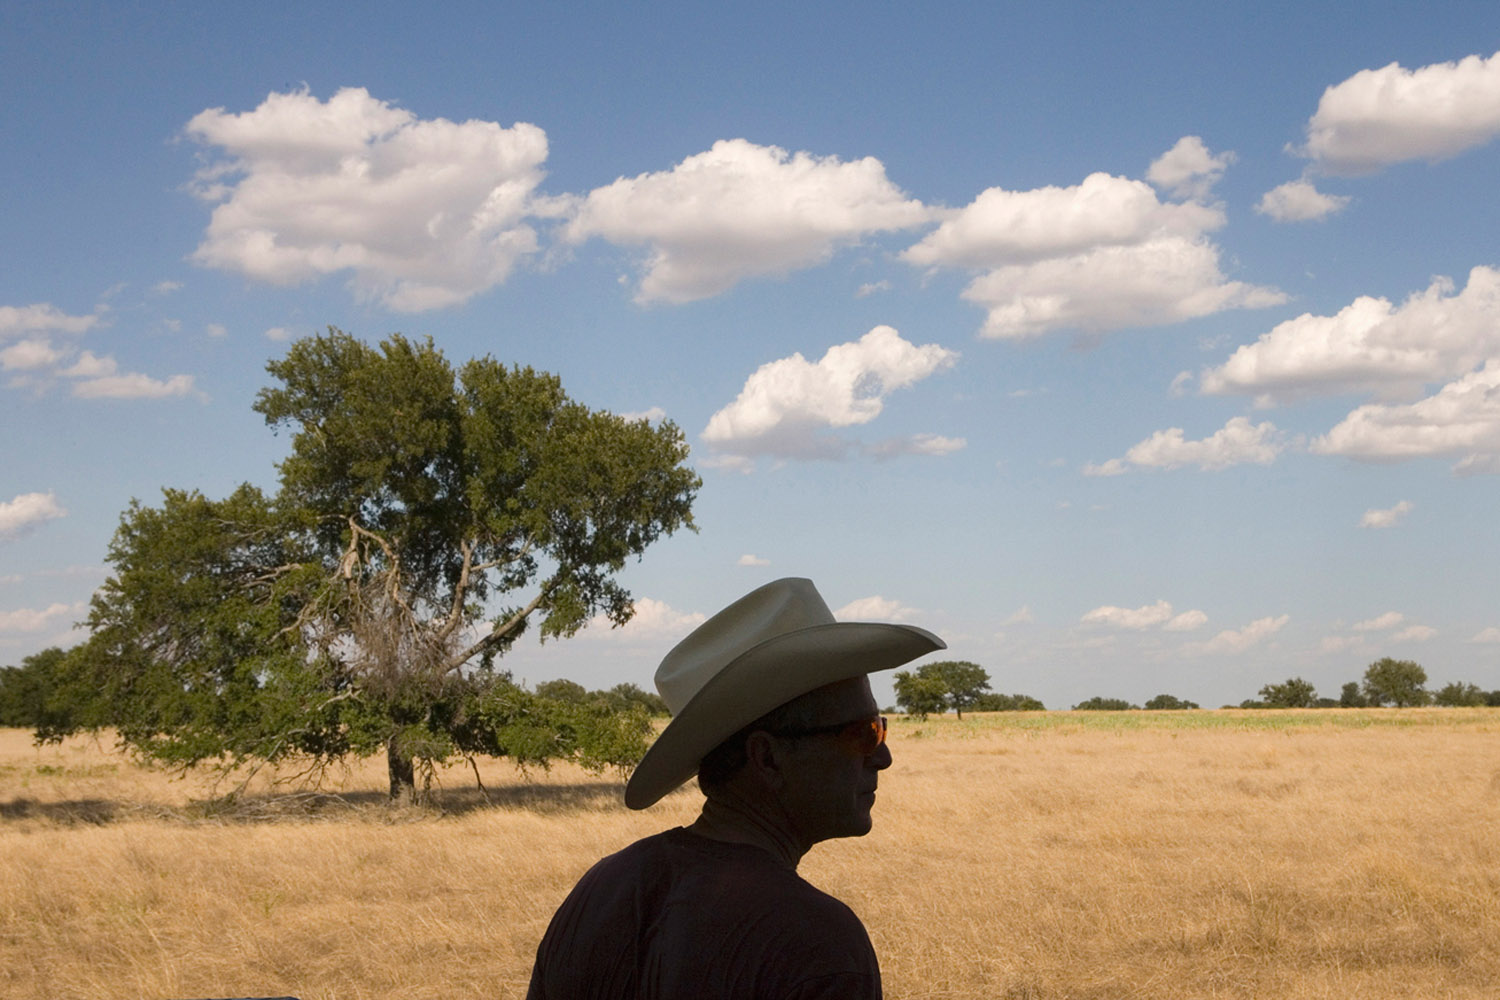 August 11, 2006. The president is silhouetted by the afternoon sky as he builds bike trails on the ranch in Crawford, Texas.